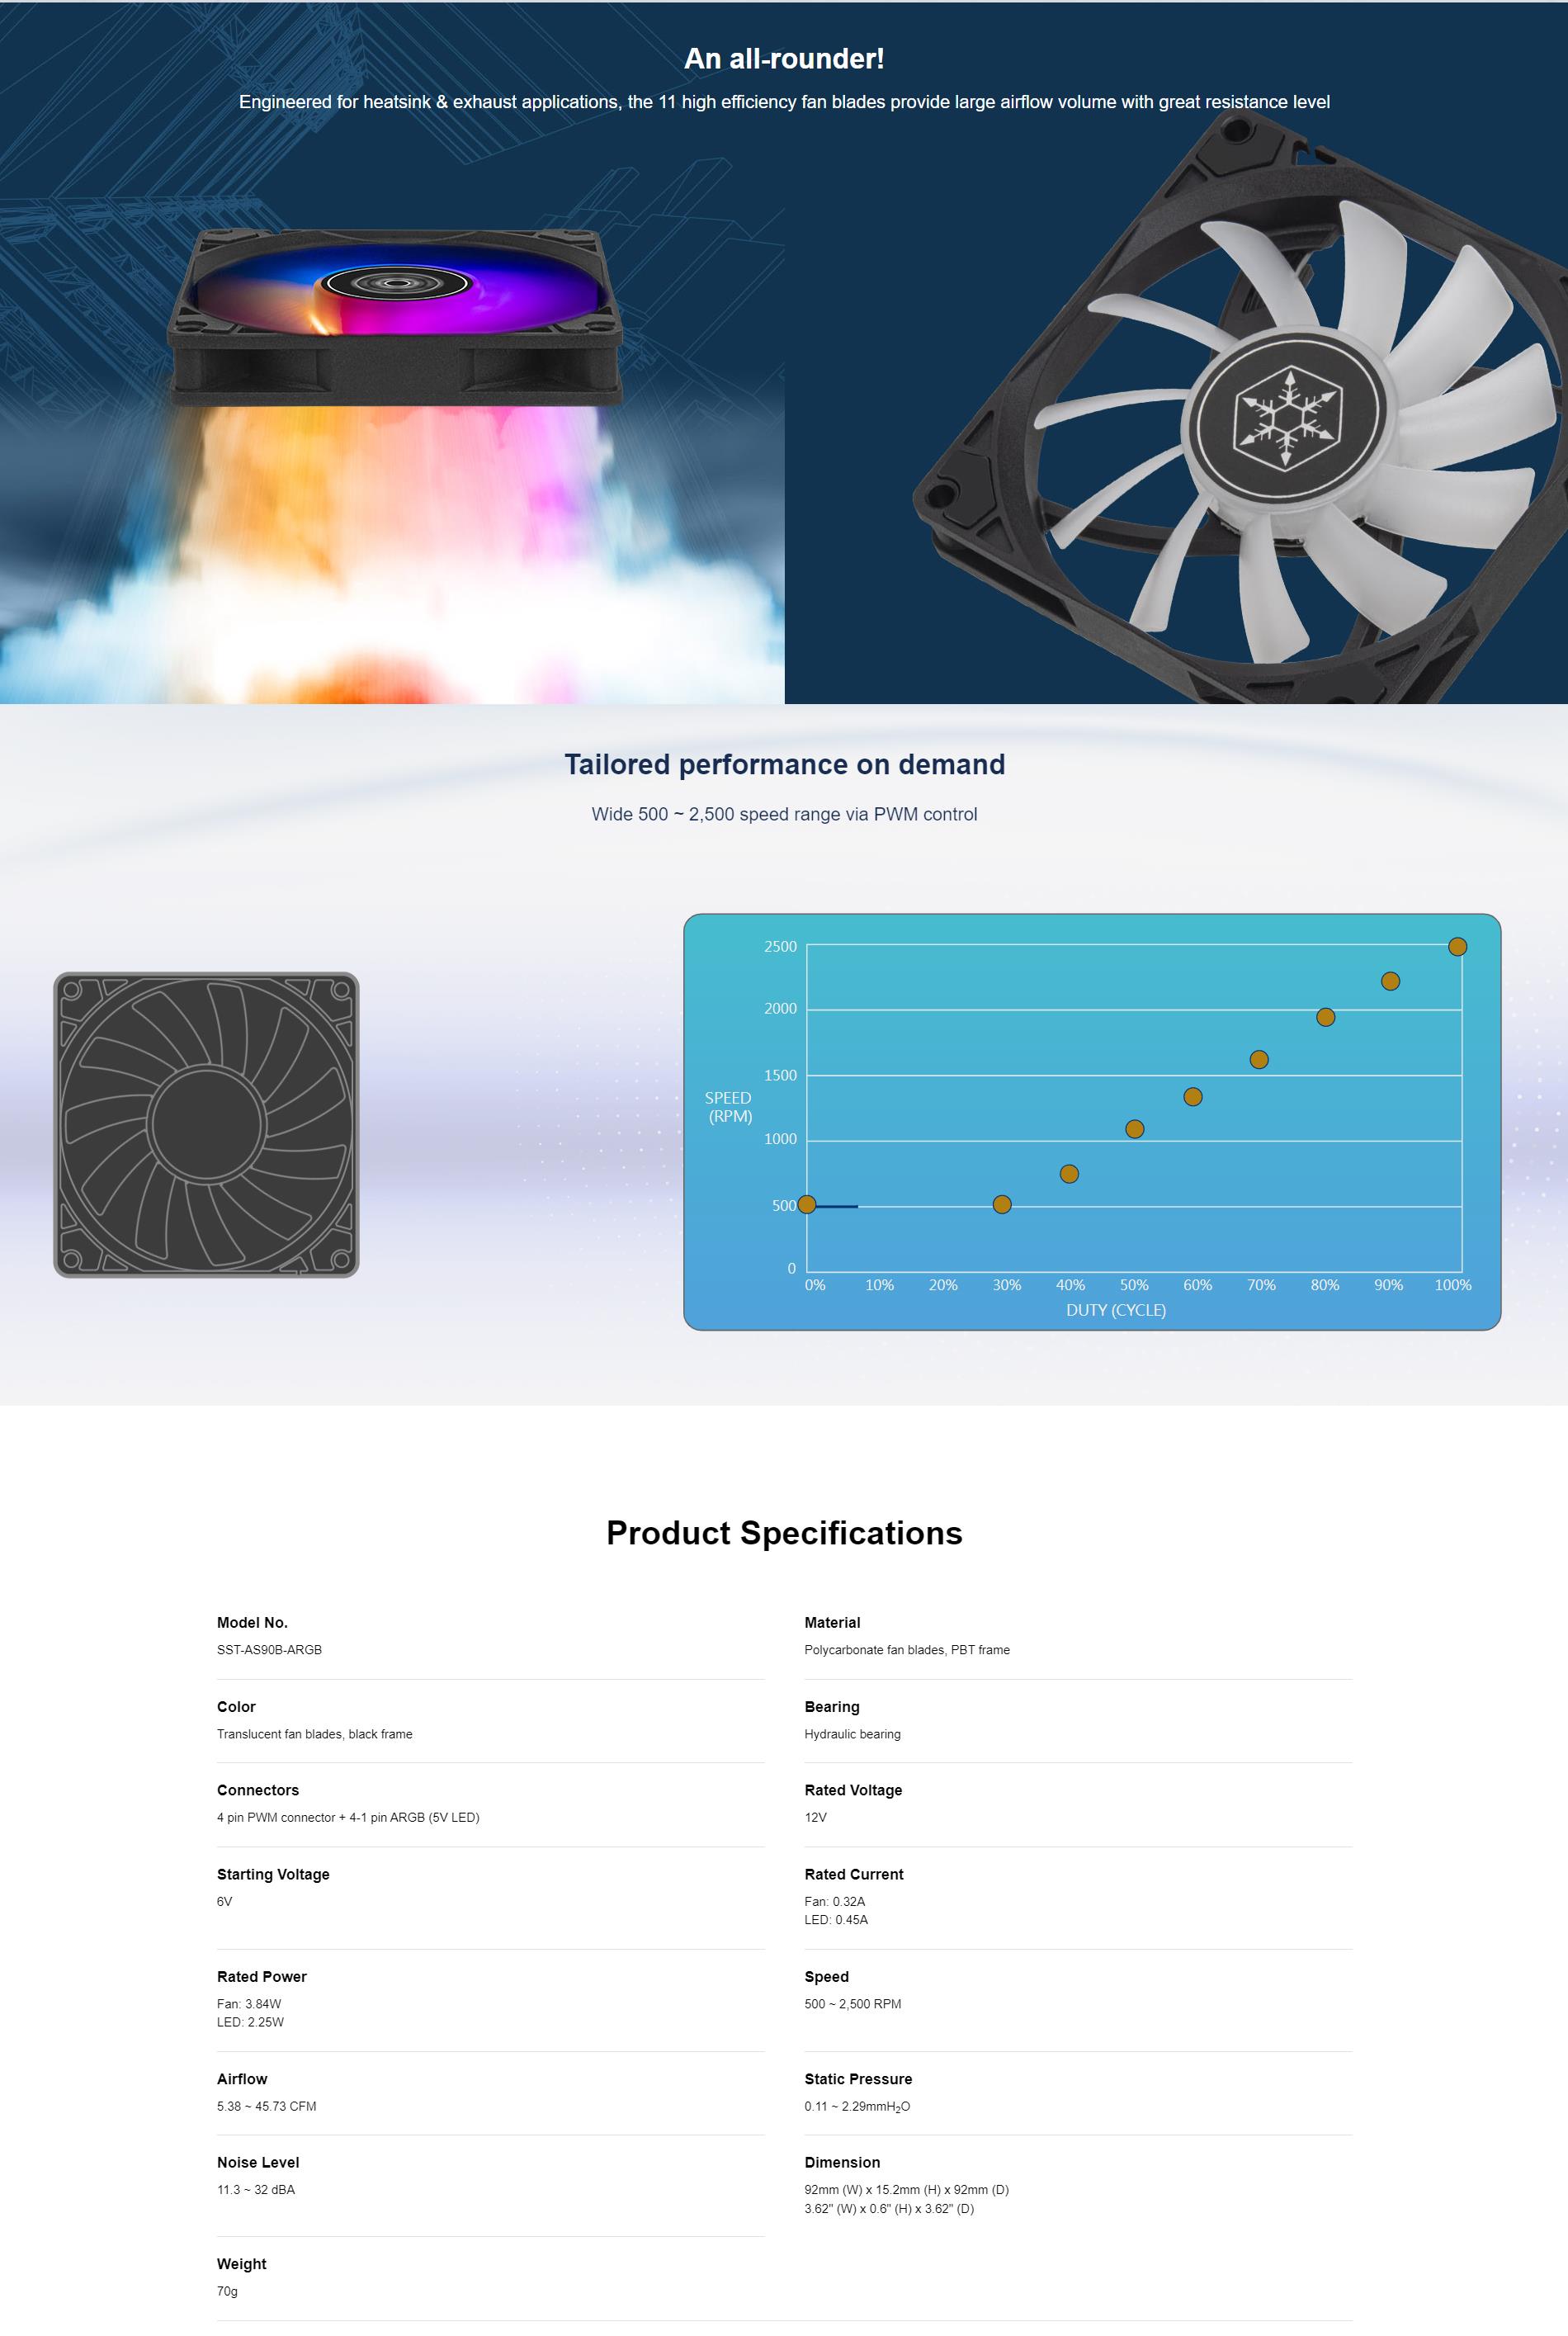 A large marketing image providing additional information about the product SilverStone Air Slimmer 90 ARGB 92mm PWM Cooling Fan - Additional alt info not provided